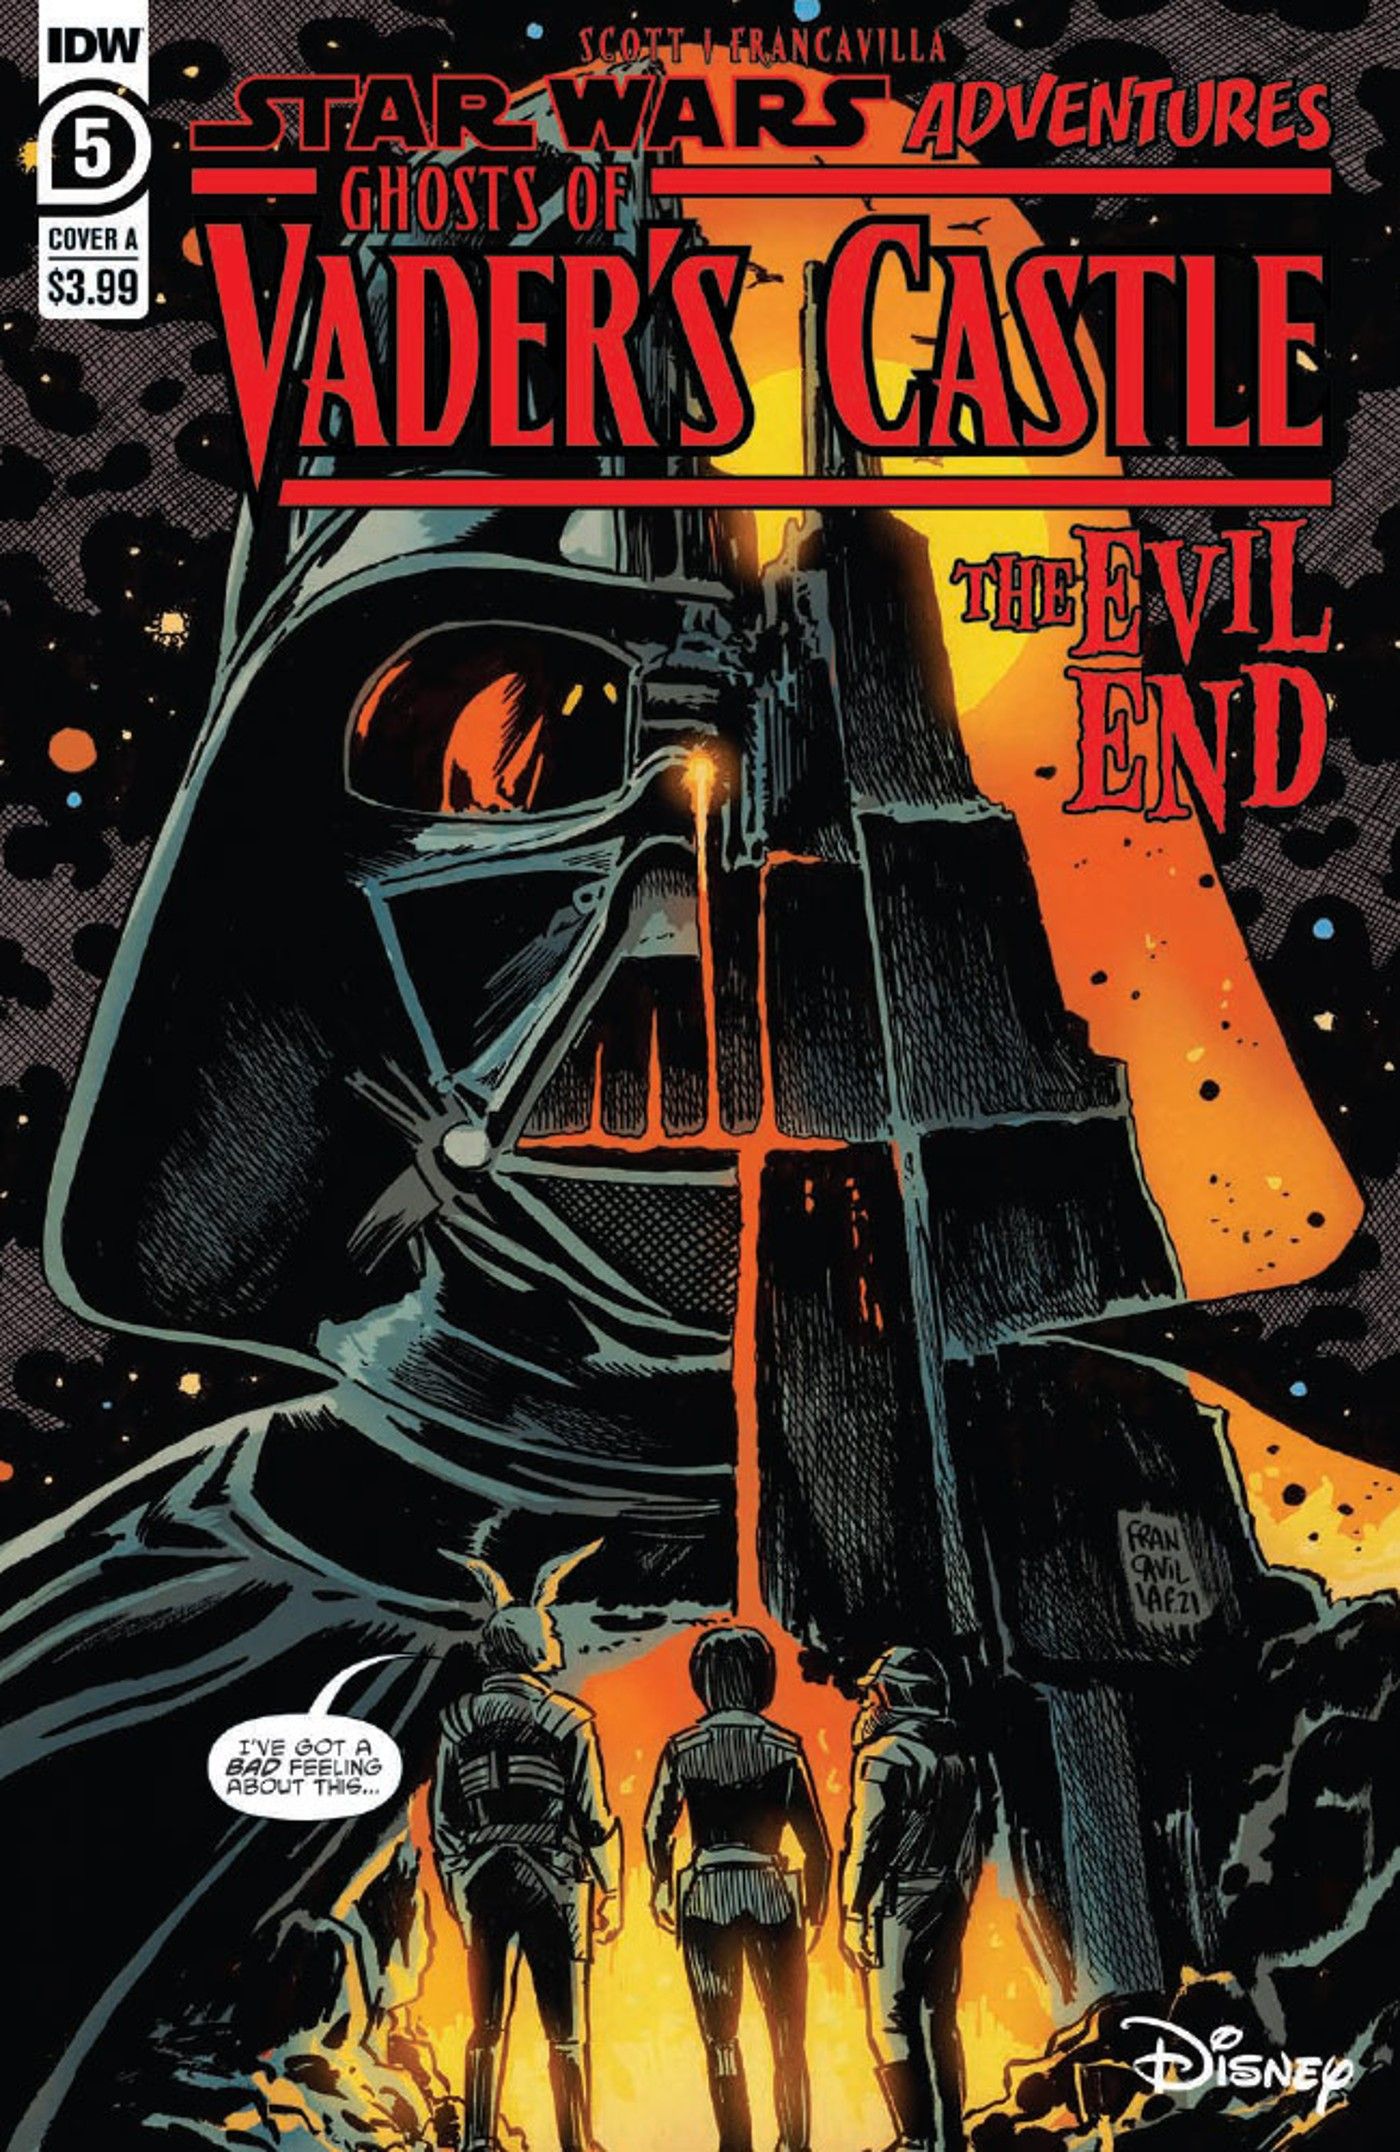 ghosts-of-vader’s-castle-5-preview-page 1